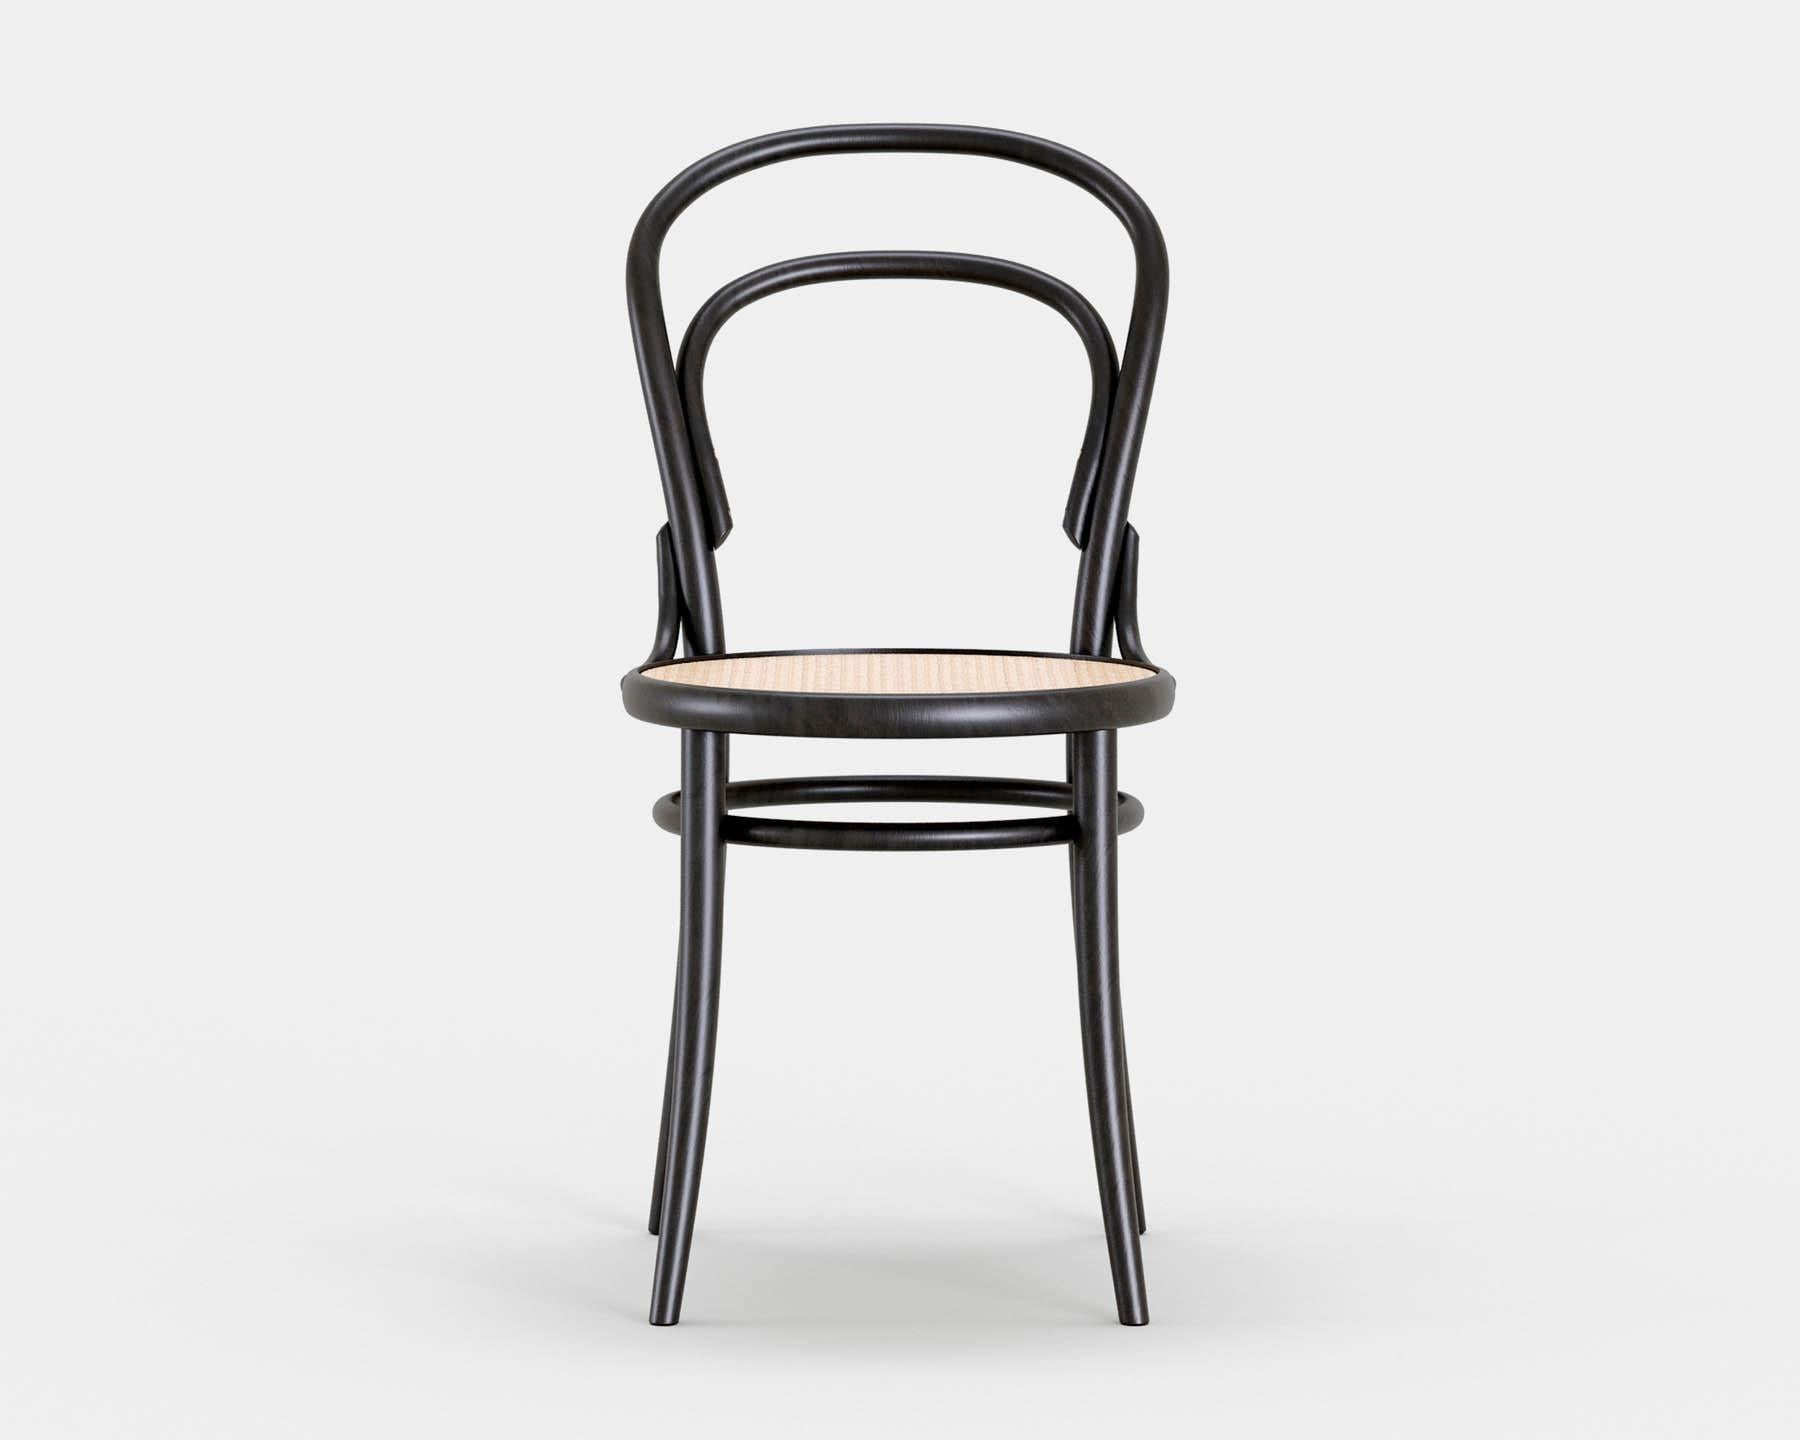 Chair No. 14
Iconic bistro chair conceived by Michael Thonet in 1869, now produced in the same manufacture in Czech Republic by TON. 

Wood: solid beech 
Finish: black stain
Seat: can seat.

--
Chair no. 14 by TON is one of the oldest, most